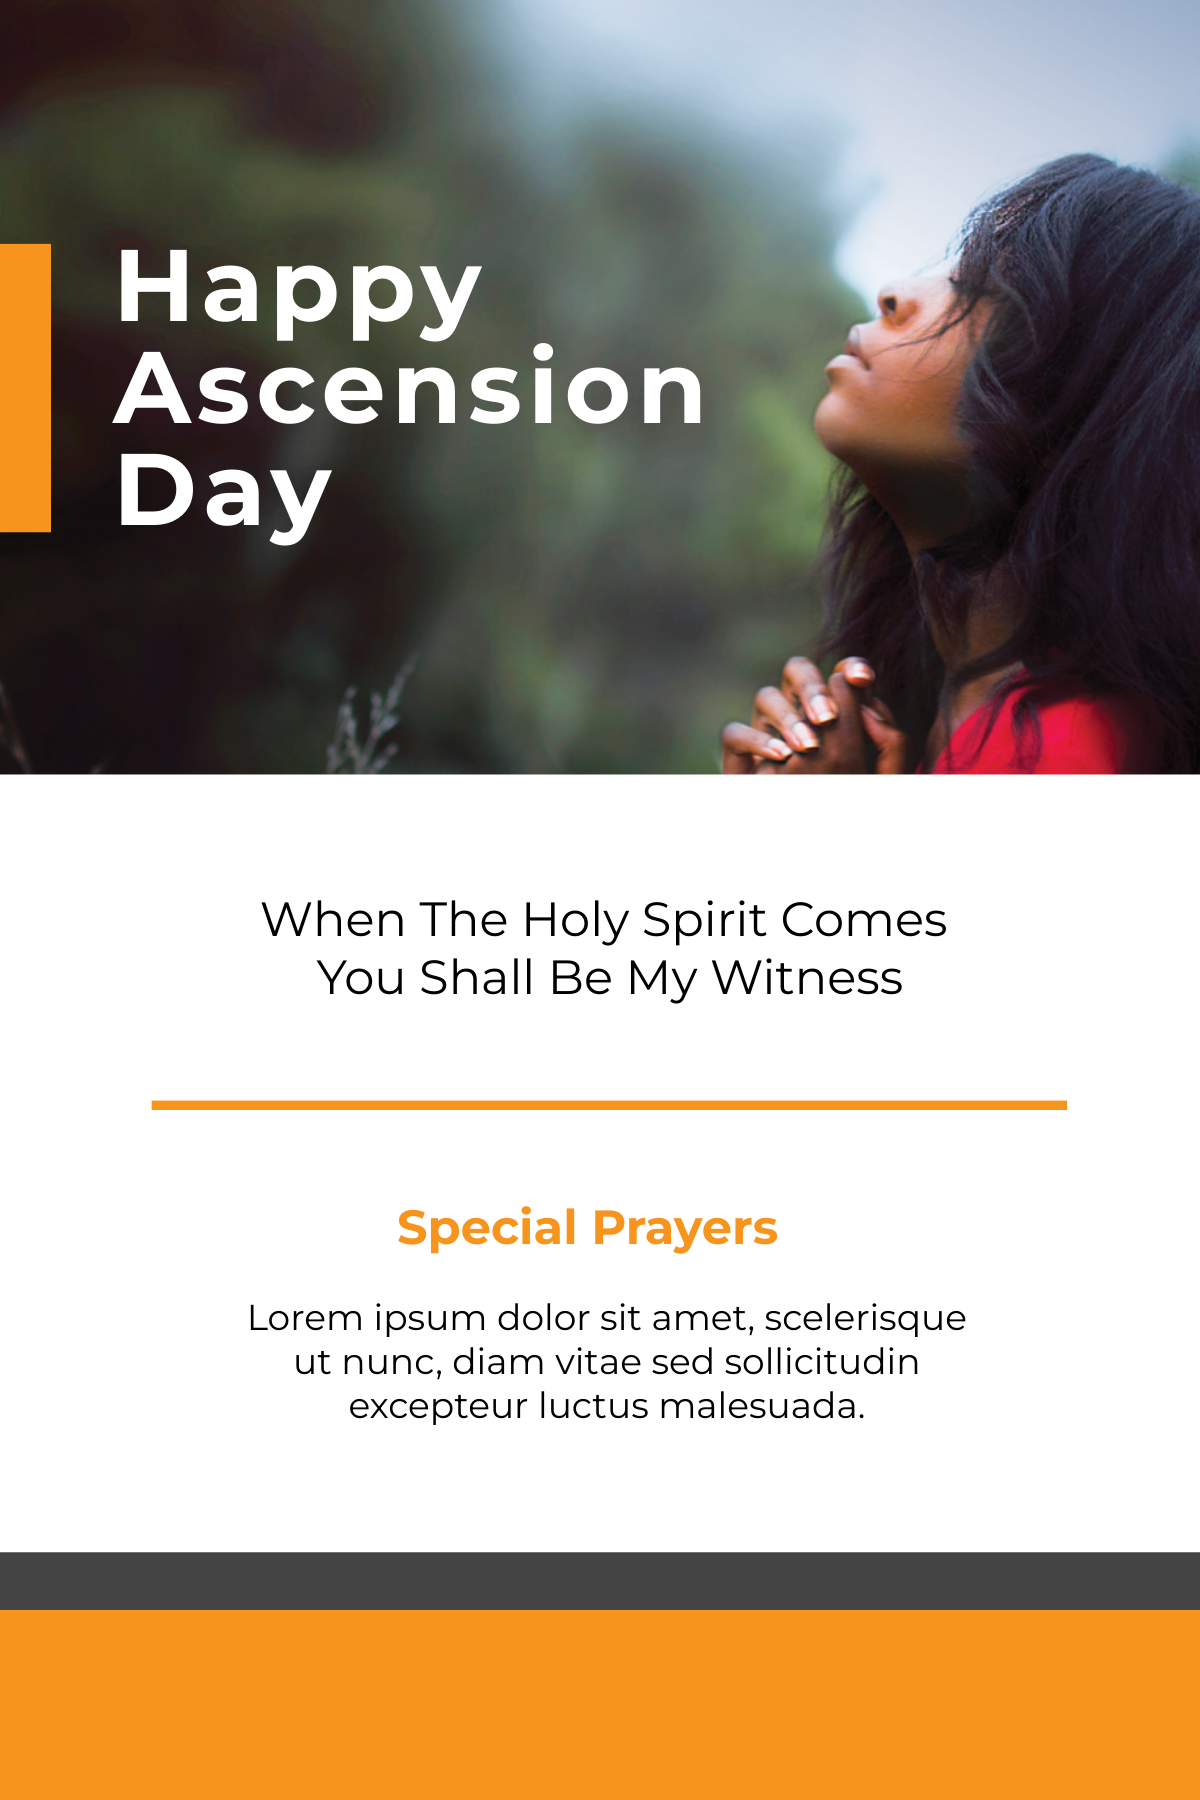 Ascension Day Email Newsletter Template